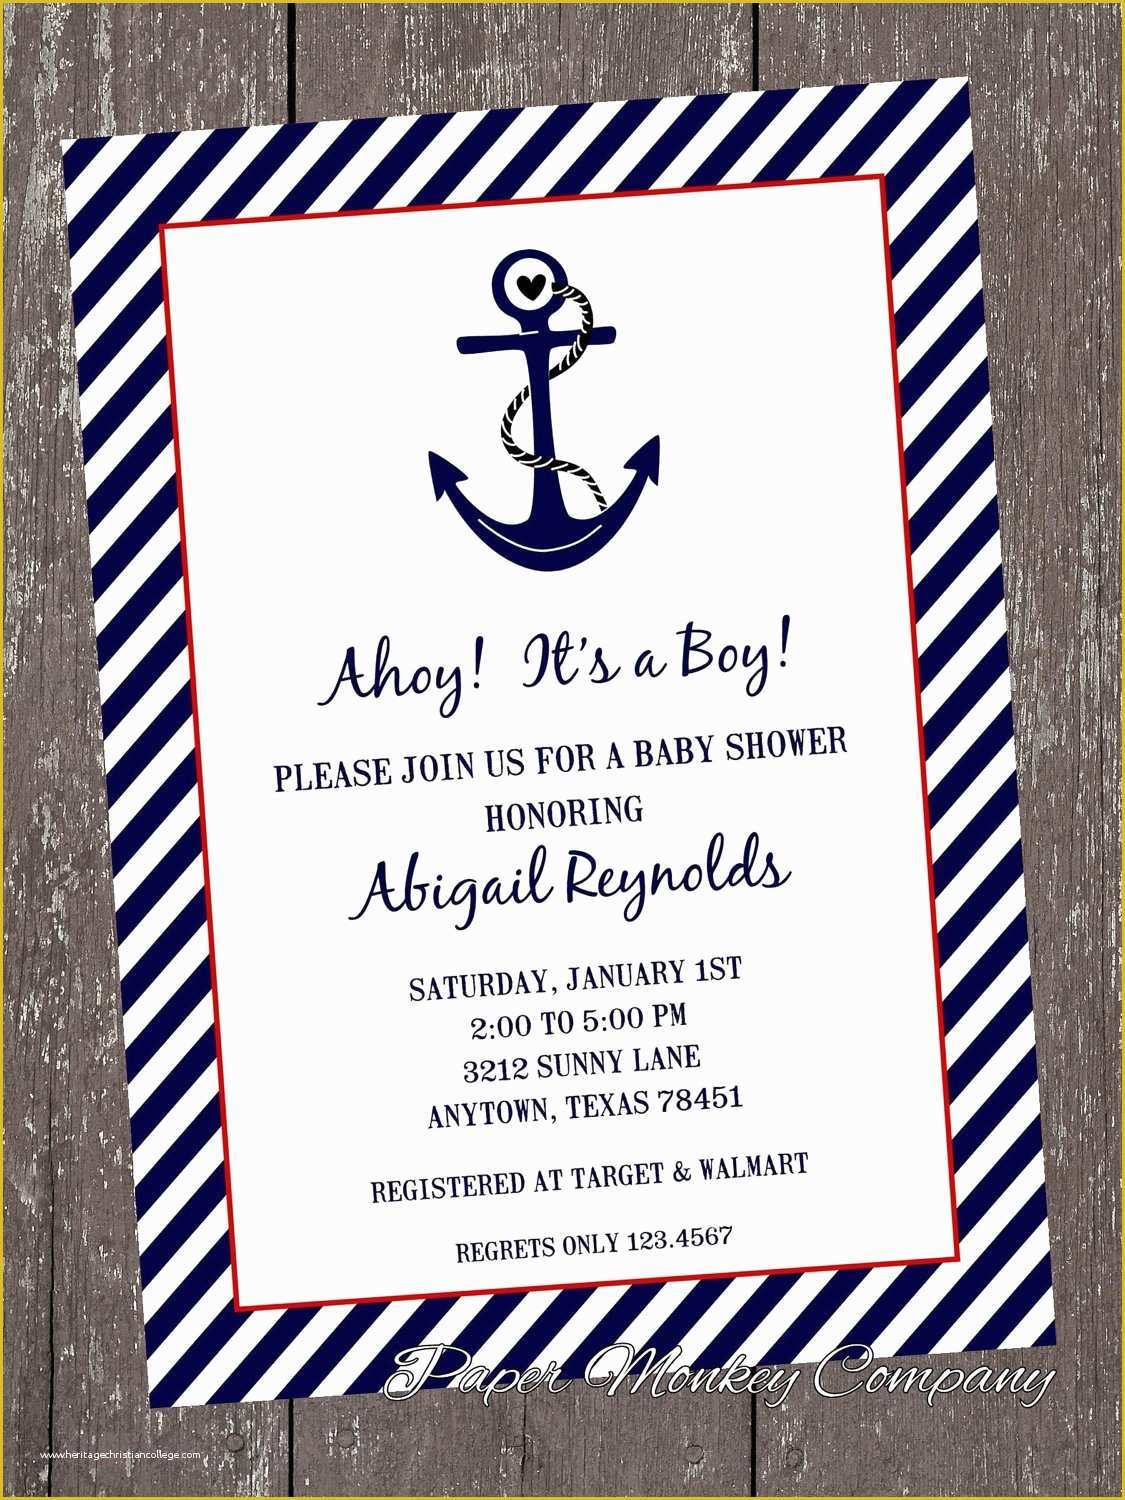 Free Nautical Invitation Templates Of Nautical Baby Shower Invitations 1 00 Each with by